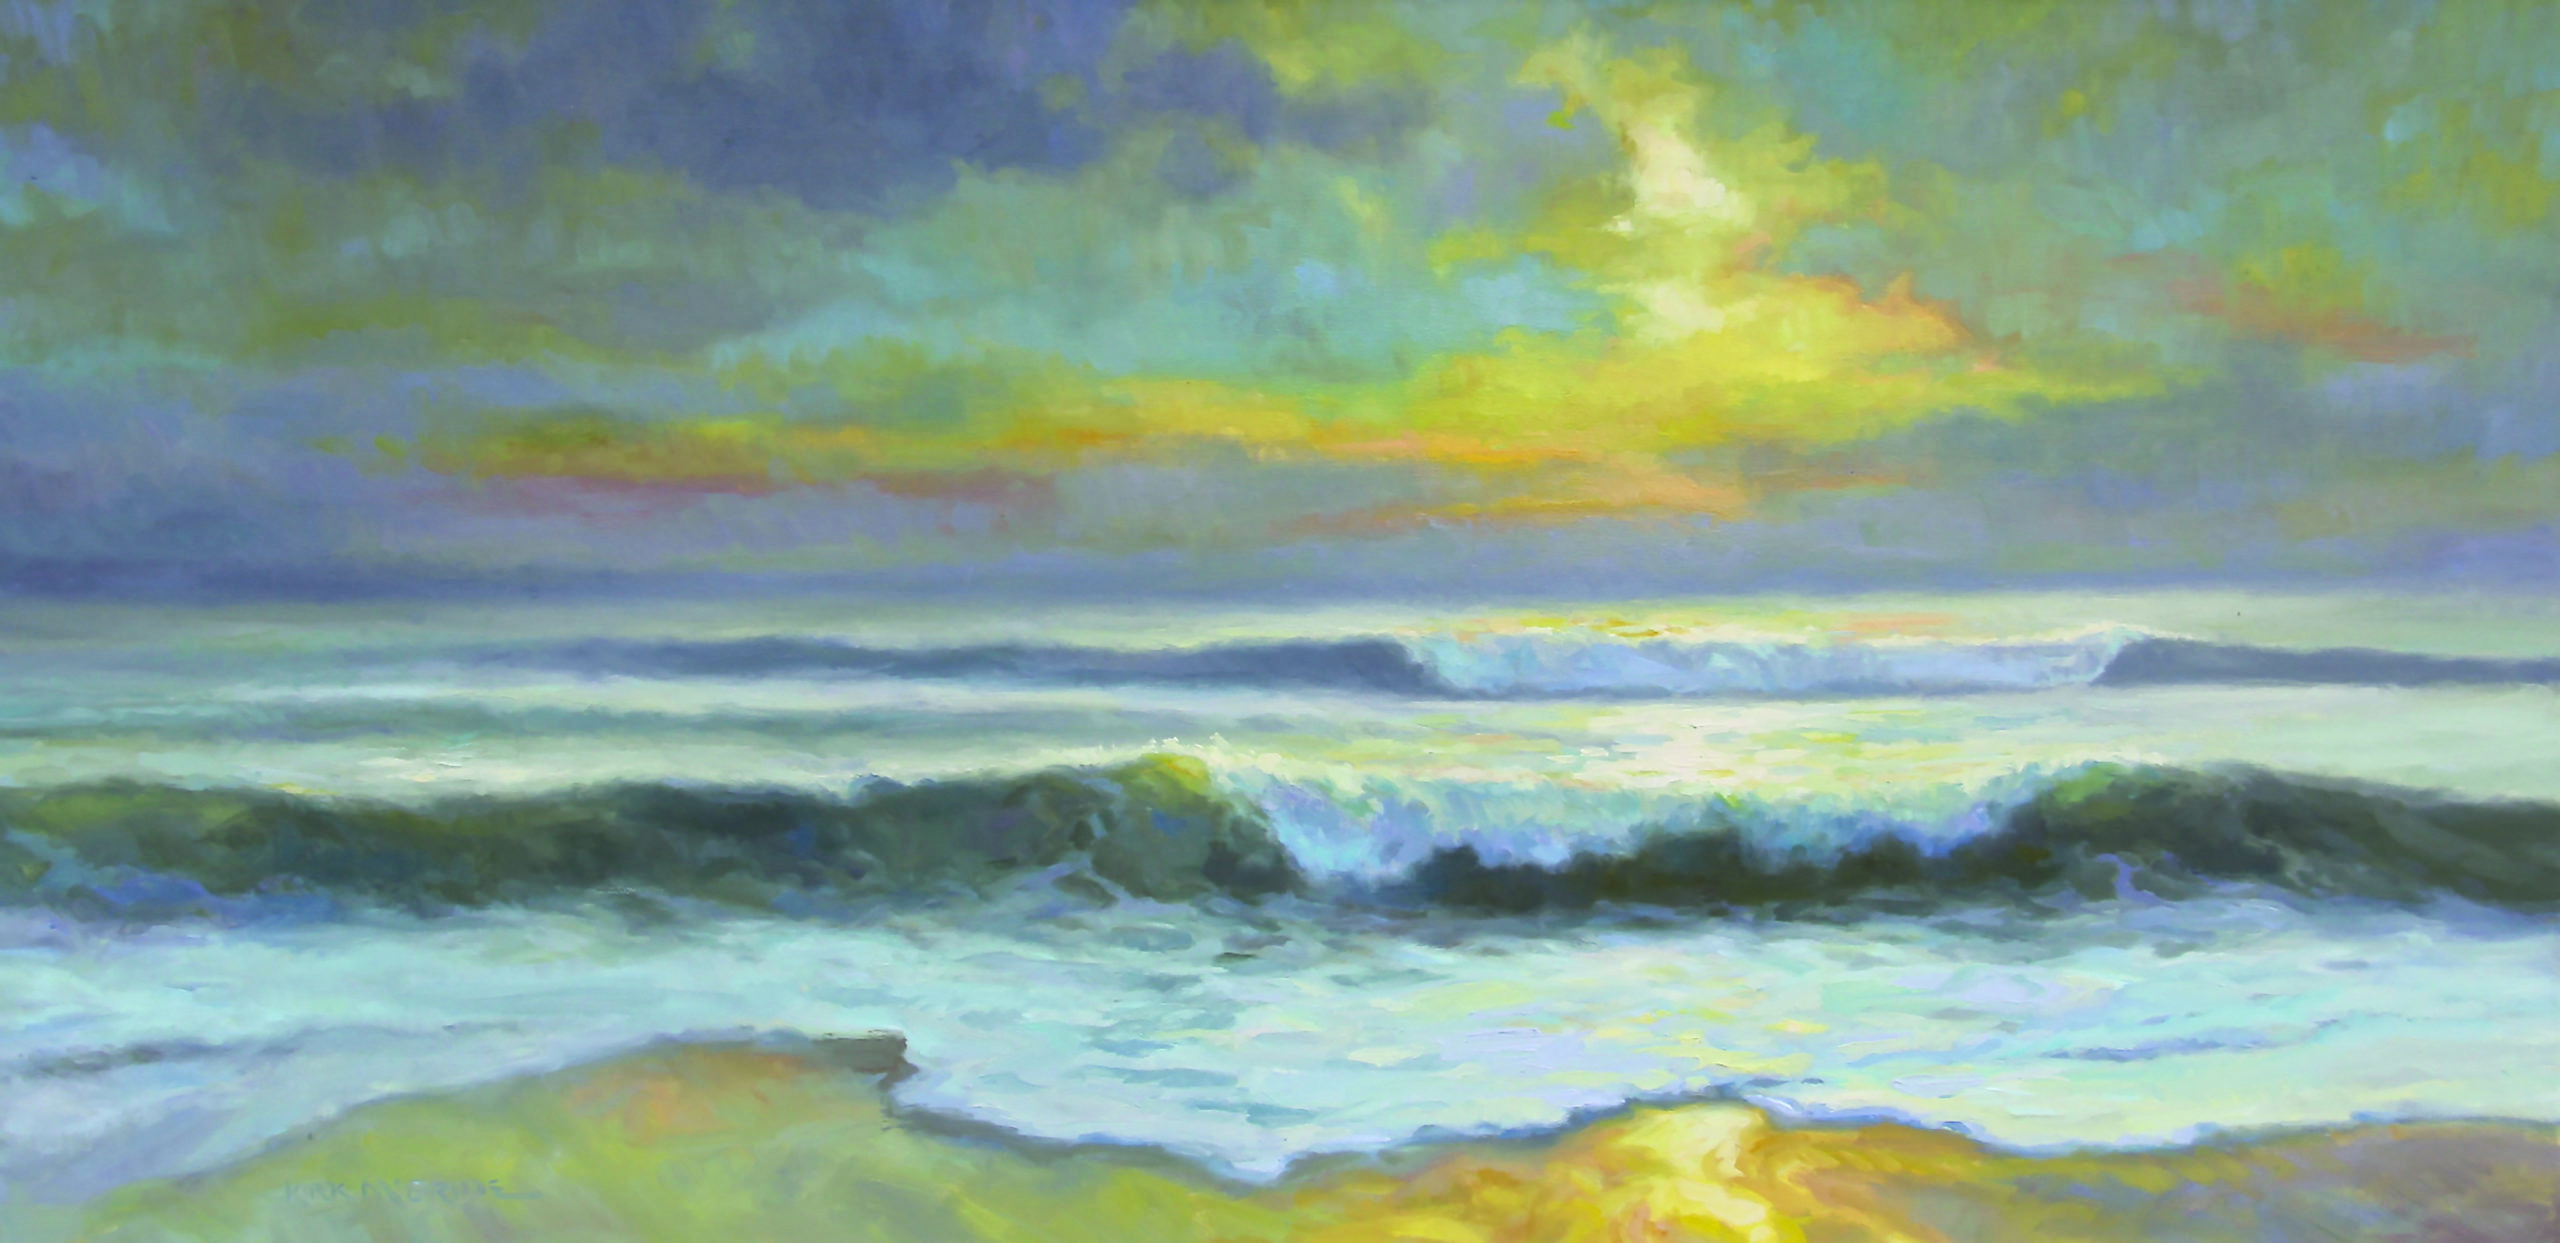 Kirk McBride (b. 1952), "Small Waves at Sunrise," [Assateague Island National Seashore, Maryland/Virginia], 2015, oil on canvas, 24 x 48 in., private collection